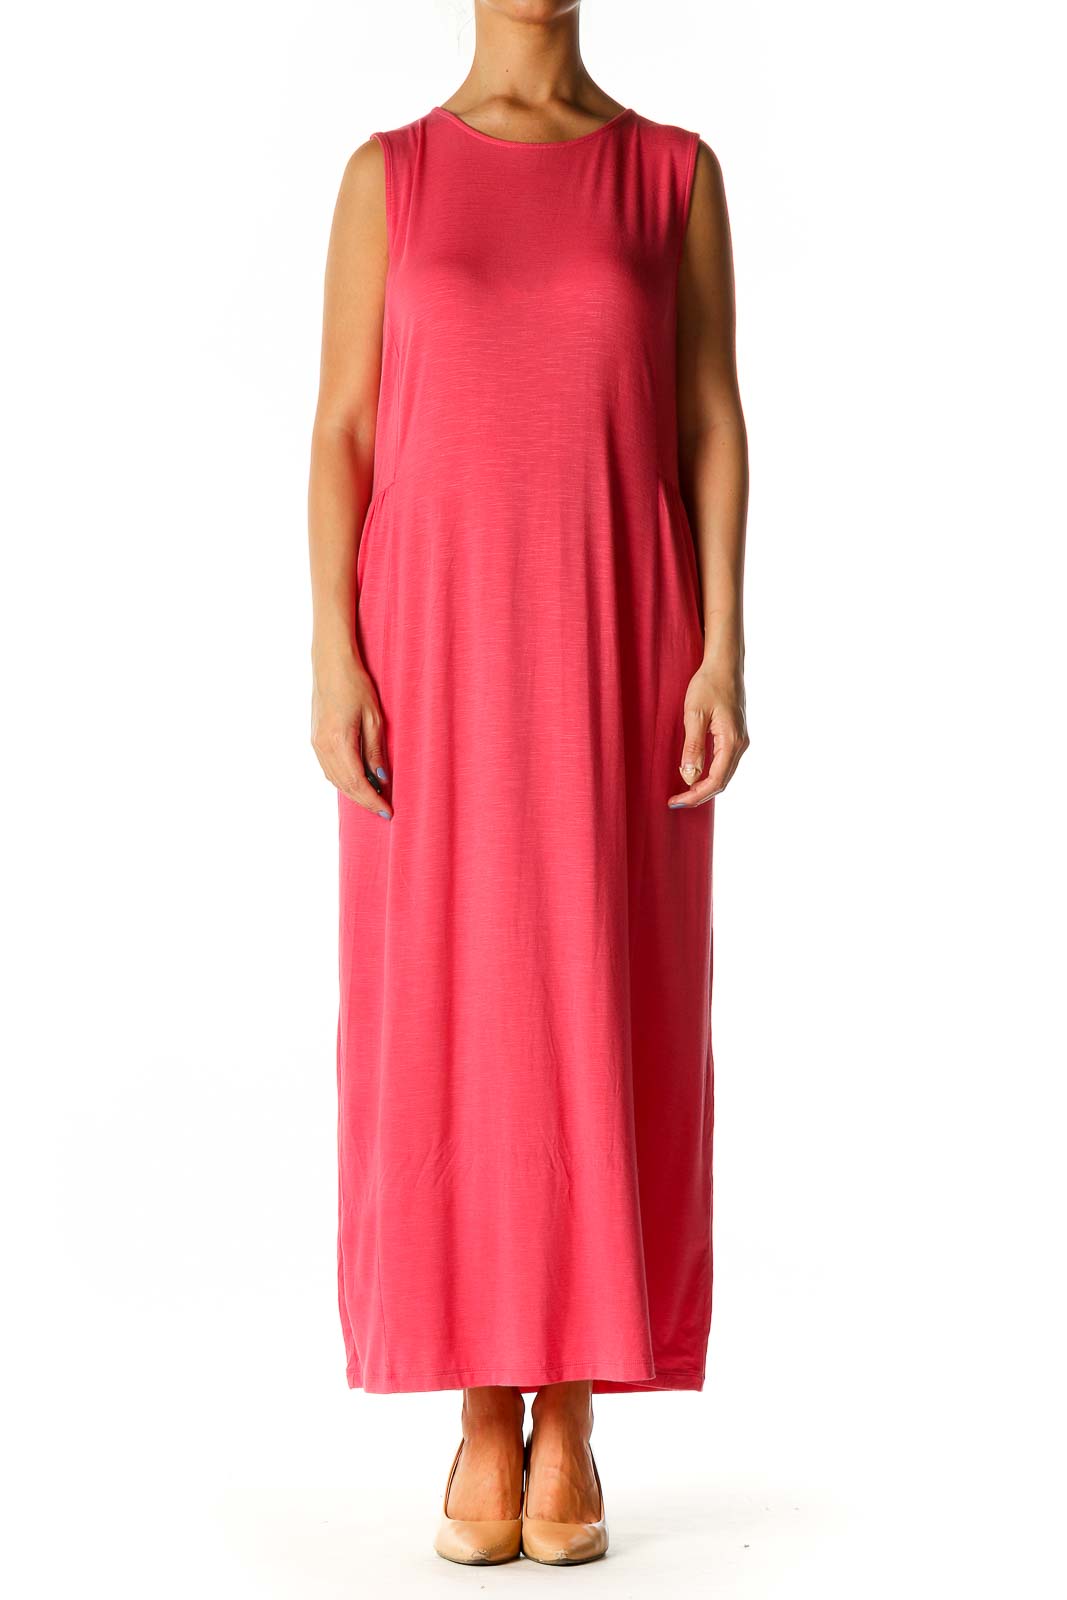 Pink Solid Casual Column Dress Front